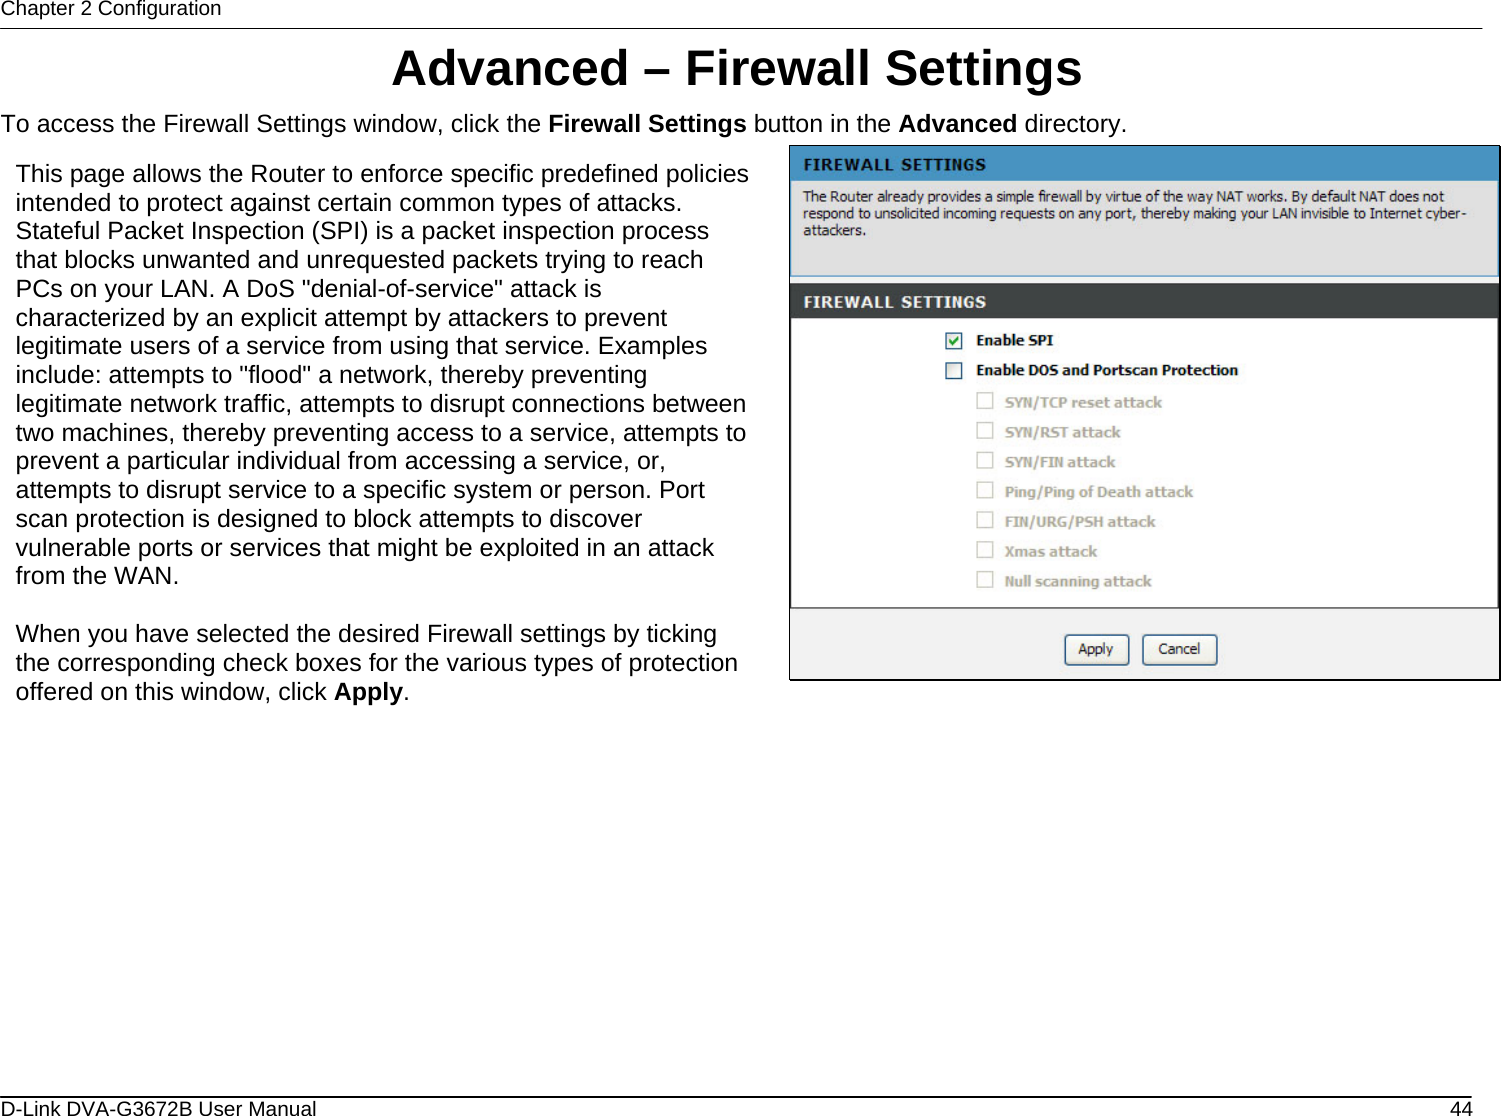 Chapter 2 Configuration Advanced – Firewall Settings To access the Firewall Settings window, click the Firewall Settings button in the Advanced directory.  This page allows the Router to enforce specific predefined policies intended to protect against certain common types of attacks. Stateful Packet Inspection (SPI) is a packet inspection process that blocks unwanted and unrequested packets trying to reach PCs on your LAN. A DoS &quot;denial-of-service&quot; attack is characterized by an explicit attempt by attackers to prevent legitimate users of a service from using that service. Examples include: attempts to &quot;flood&quot; a network, thereby preventing legitimate network traffic, attempts to disrupt connections between two machines, thereby preventing access to a service, attempts to prevent a particular individual from accessing a service, or, attempts to disrupt service to a specific system or person. Port scan protection is designed to block attempts to discover vulnerable ports or services that might be exploited in an attack from the WAN.  When you have selected the desired Firewall settings by ticking the corresponding check boxes for the various types of protection offered on this window, click Apply.               D-Link DVA-G3672B User Manual  44